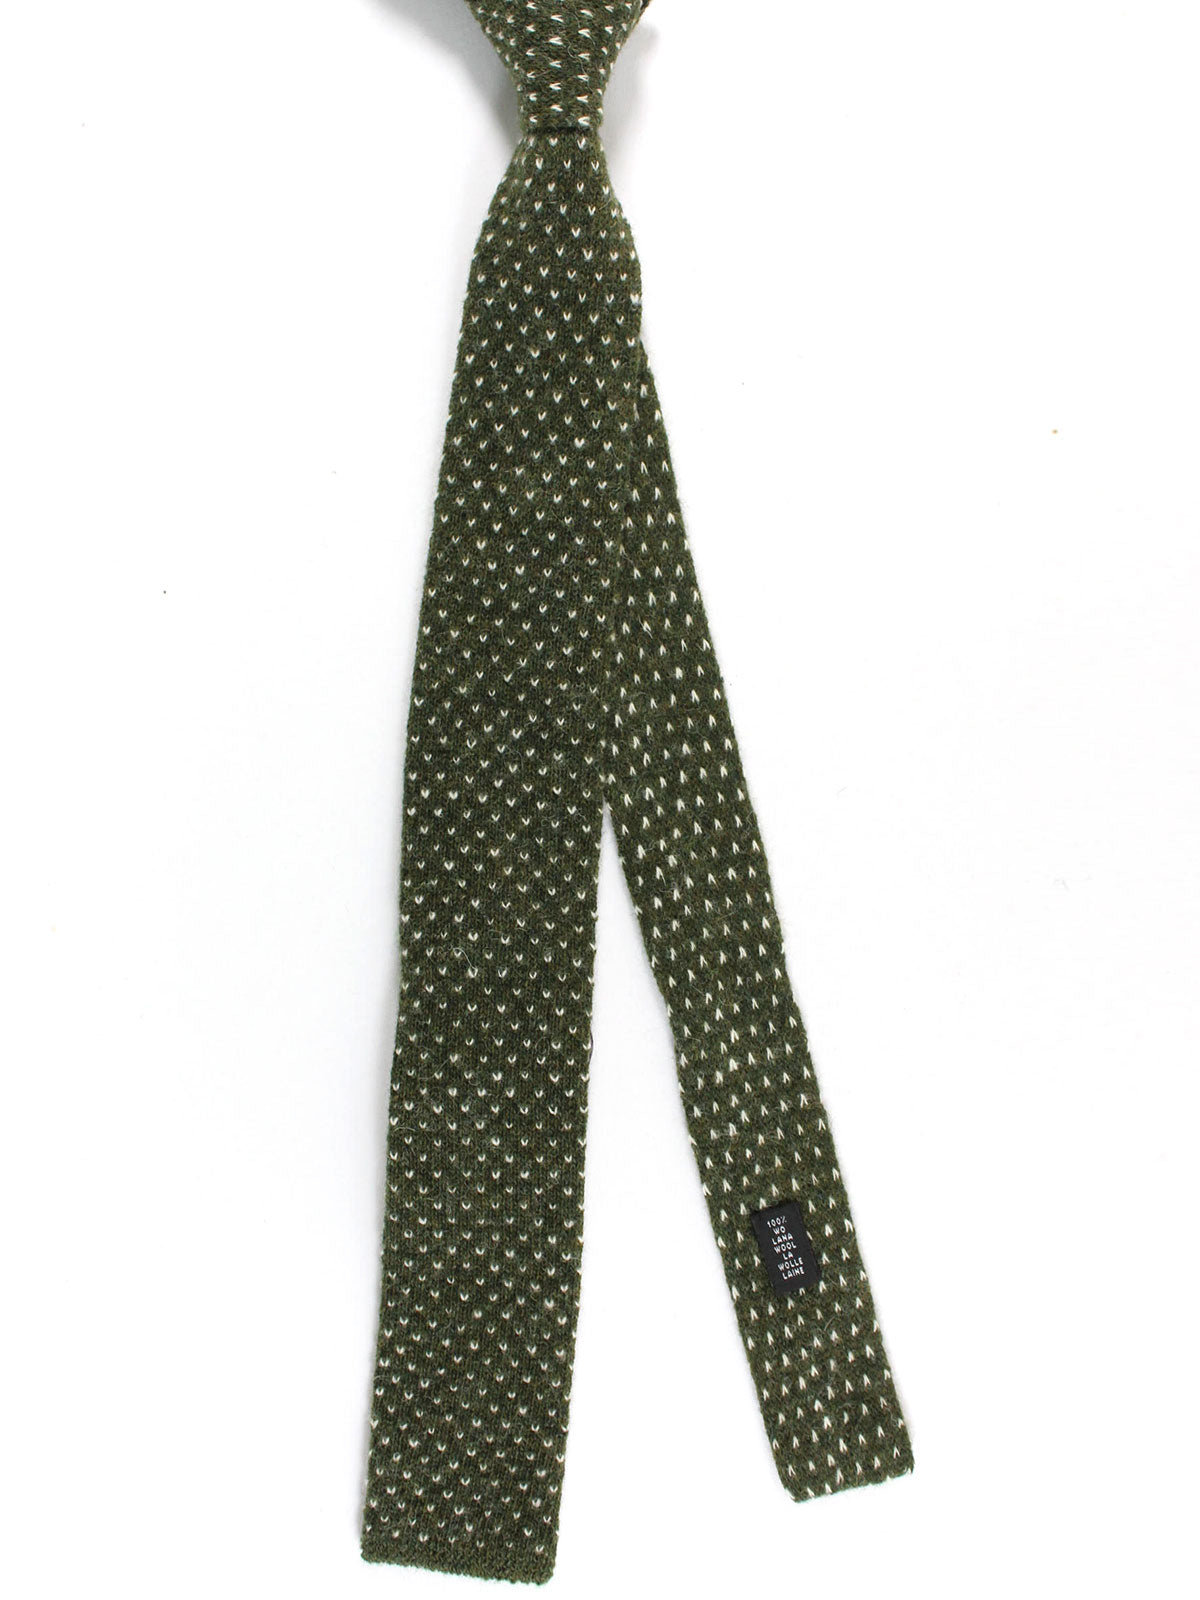 Isaia Square End Knitted Wool Tie Forest Green Birdseye